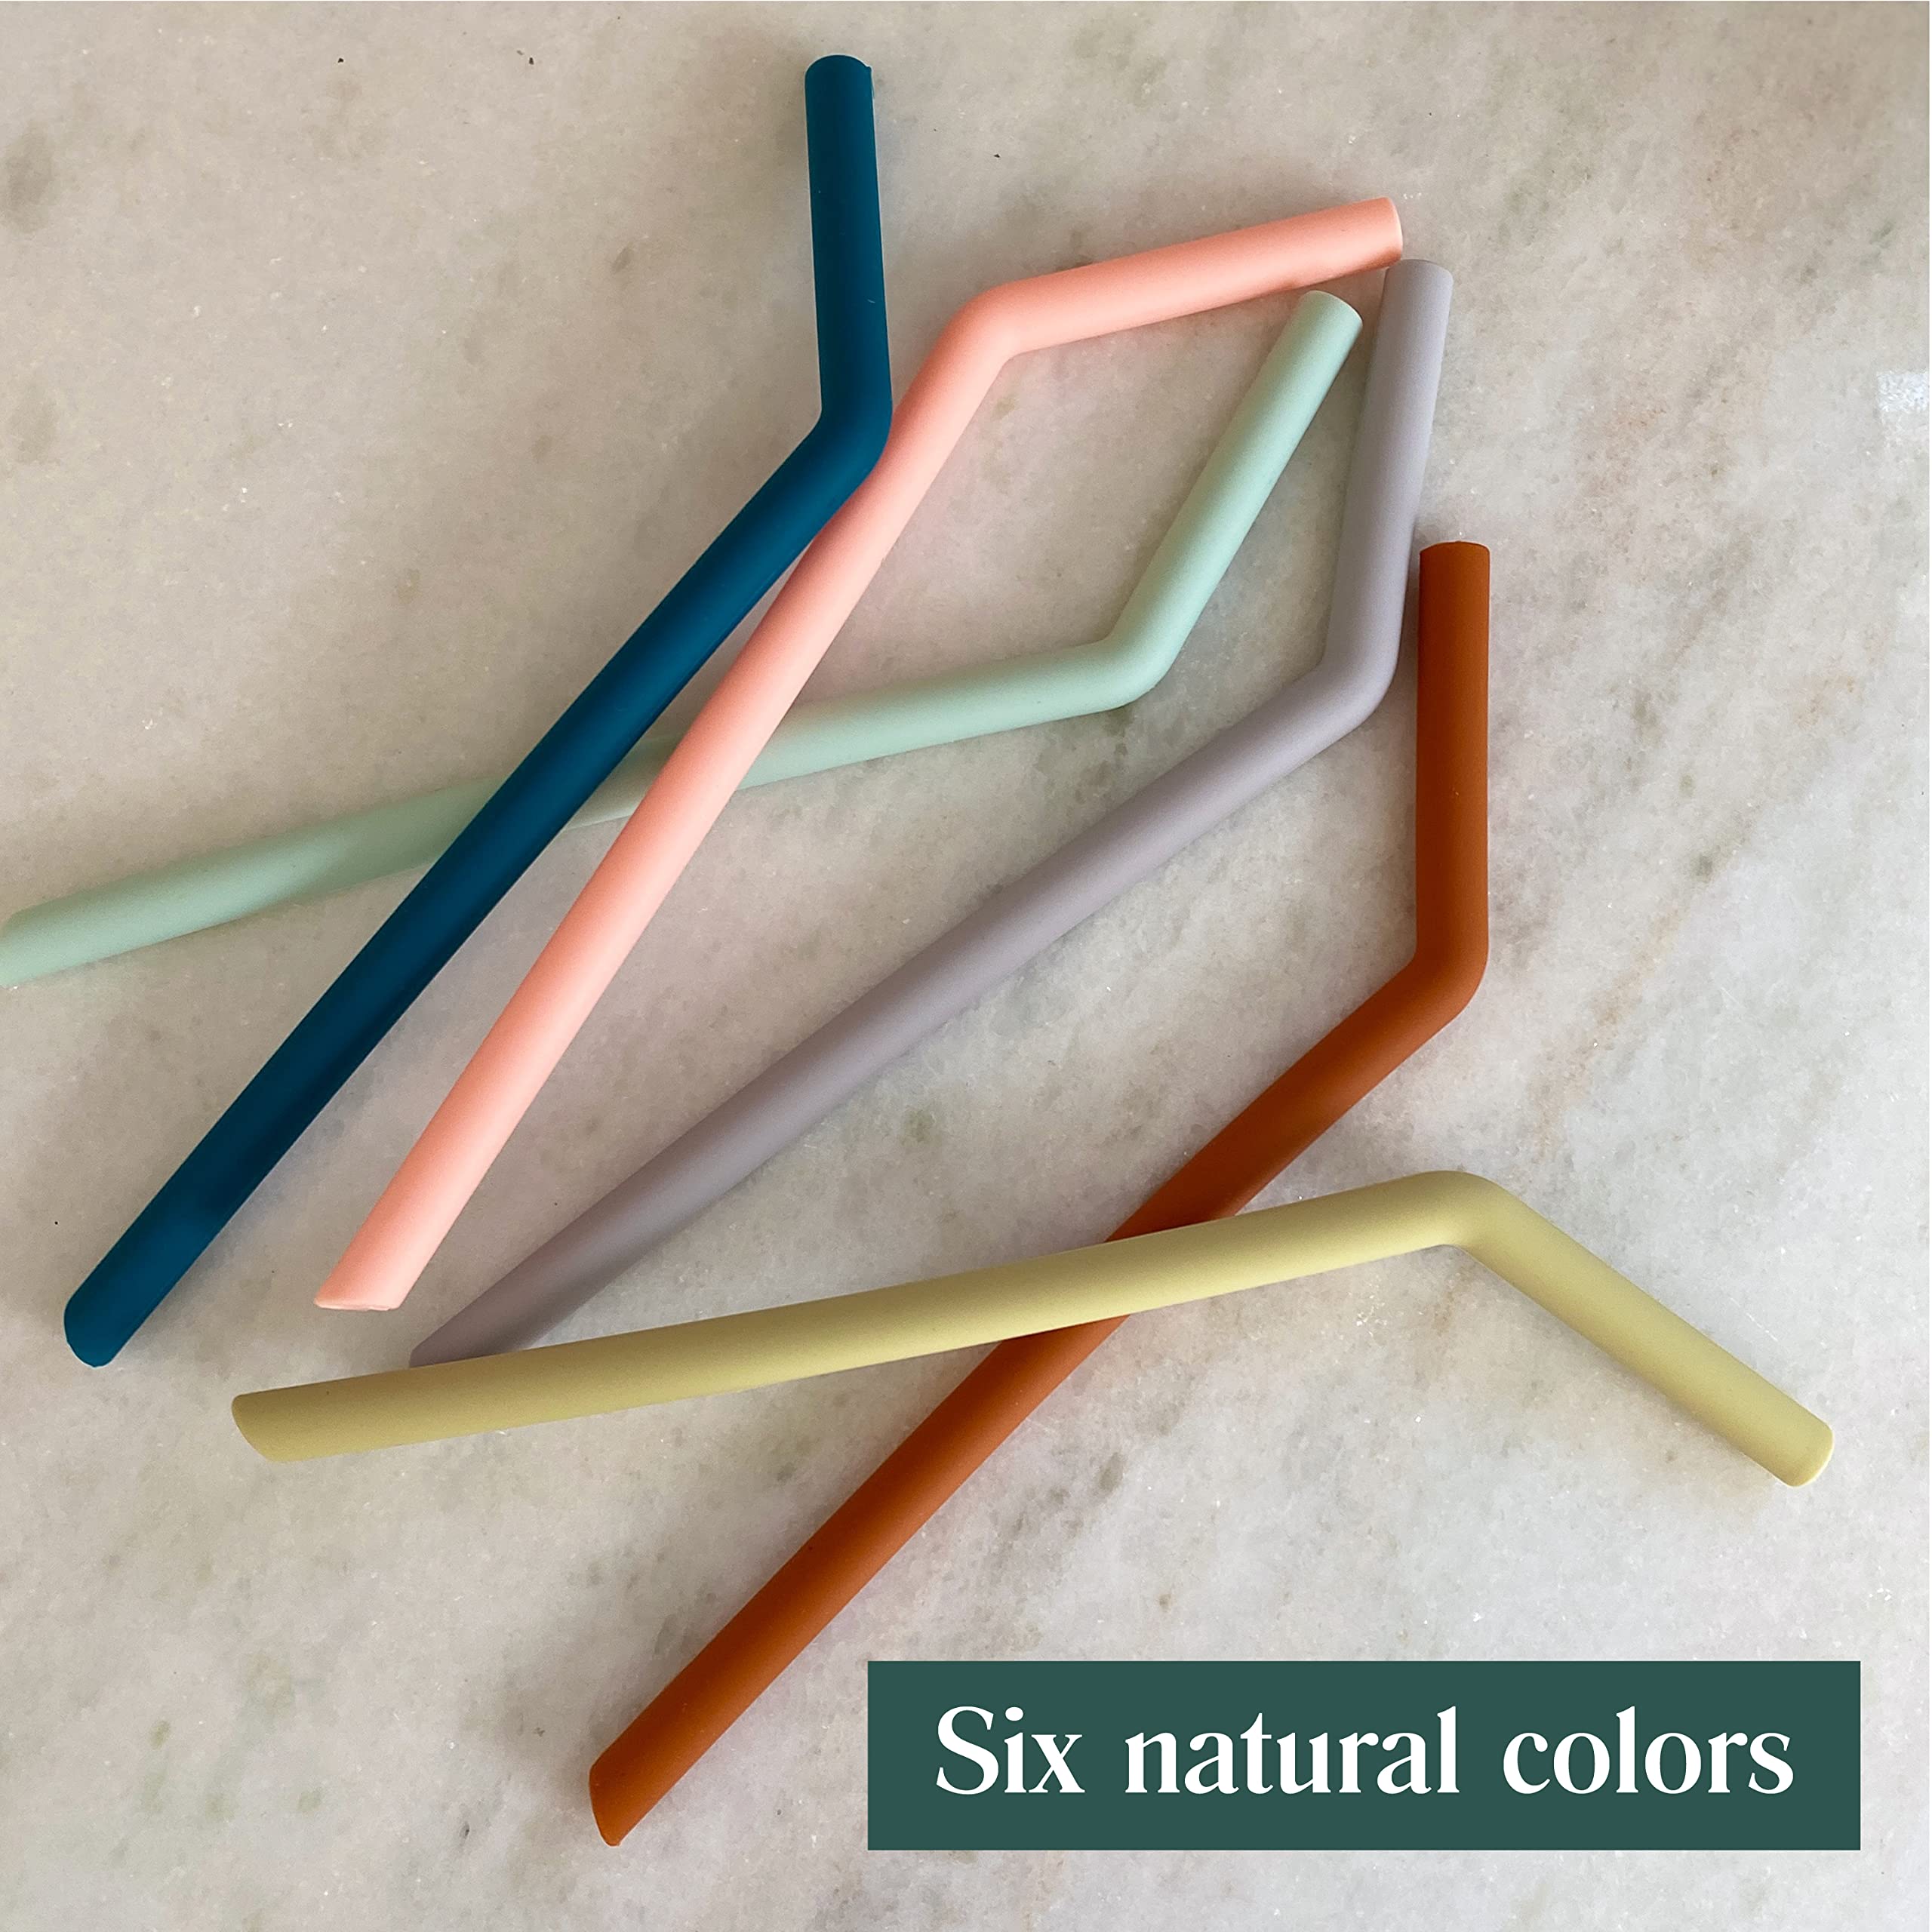 Simka Rose Silicone Straws - Reusable, Short, Bendy Kids Straws - BPA Free,Baby & Toddler Straw Set with Cleaning Brush - 5-inch, Multicolor